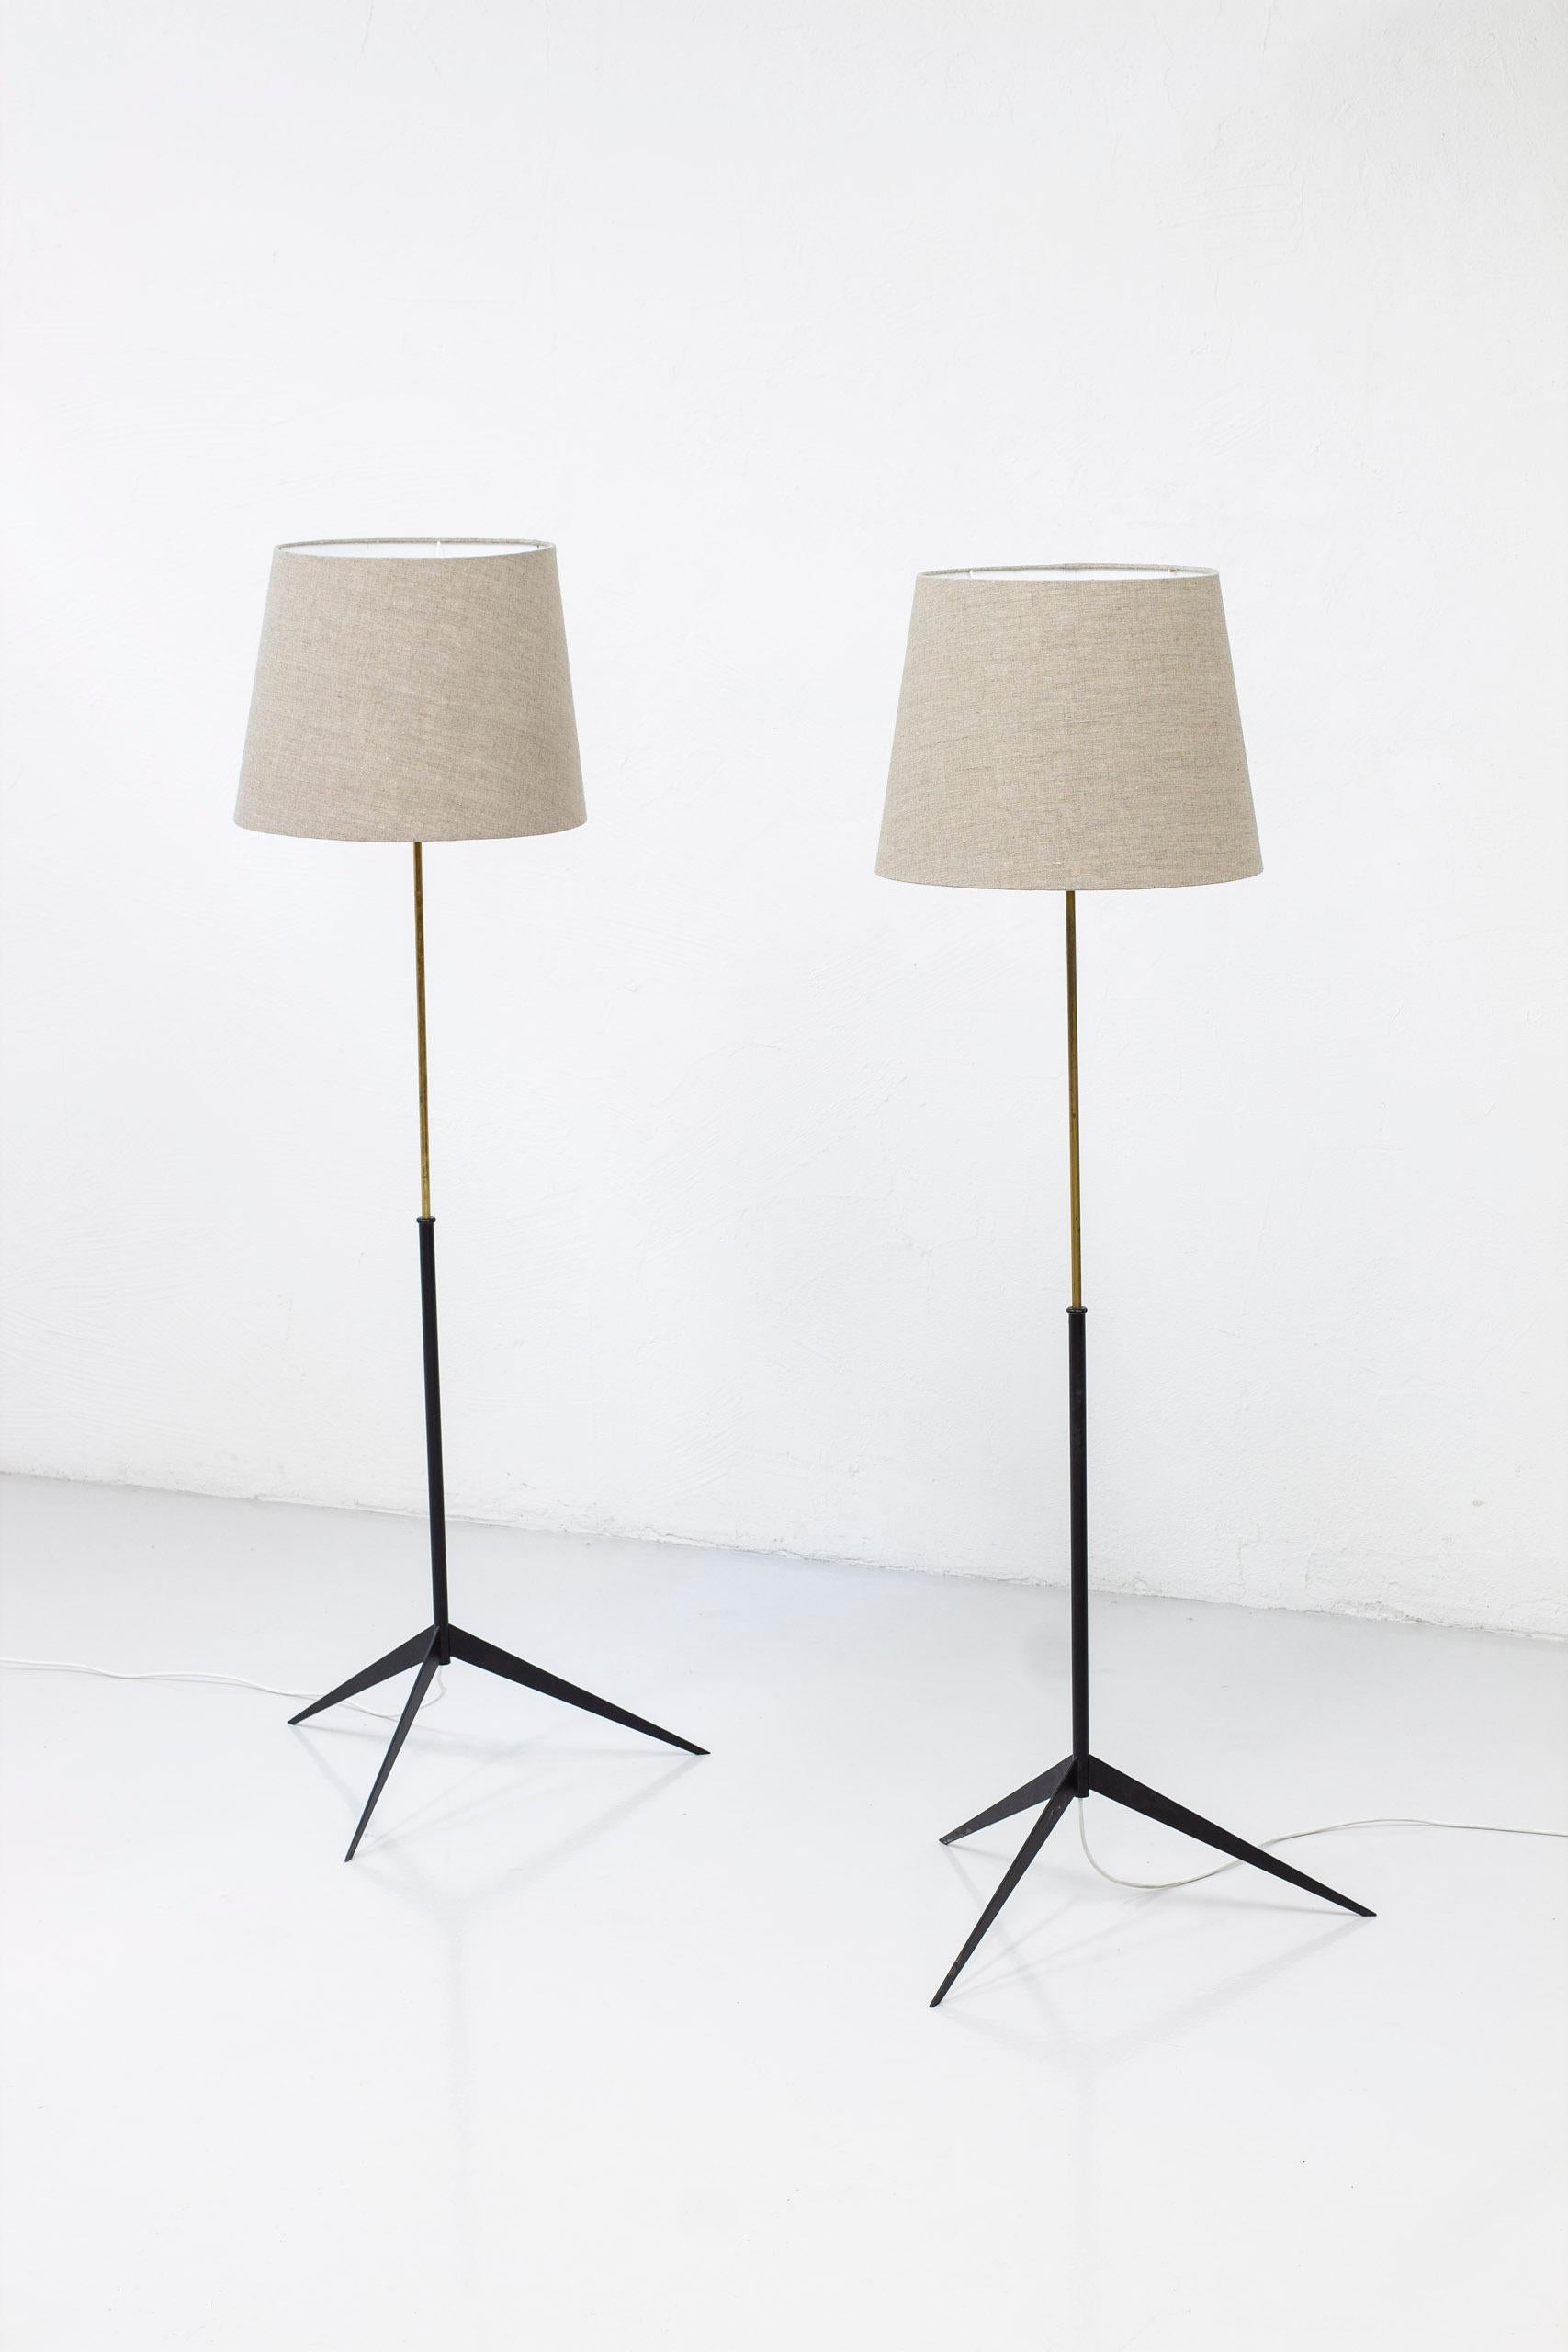 Pair of floor lamps model G-30R designed by Alf Svensson. Produced in Sweden by Bergboms during the 1950s. Made from black lacquered metall and polished brass. Lamp shades in Natural/grey linnen fabric. Light switch on both lamp holders in working